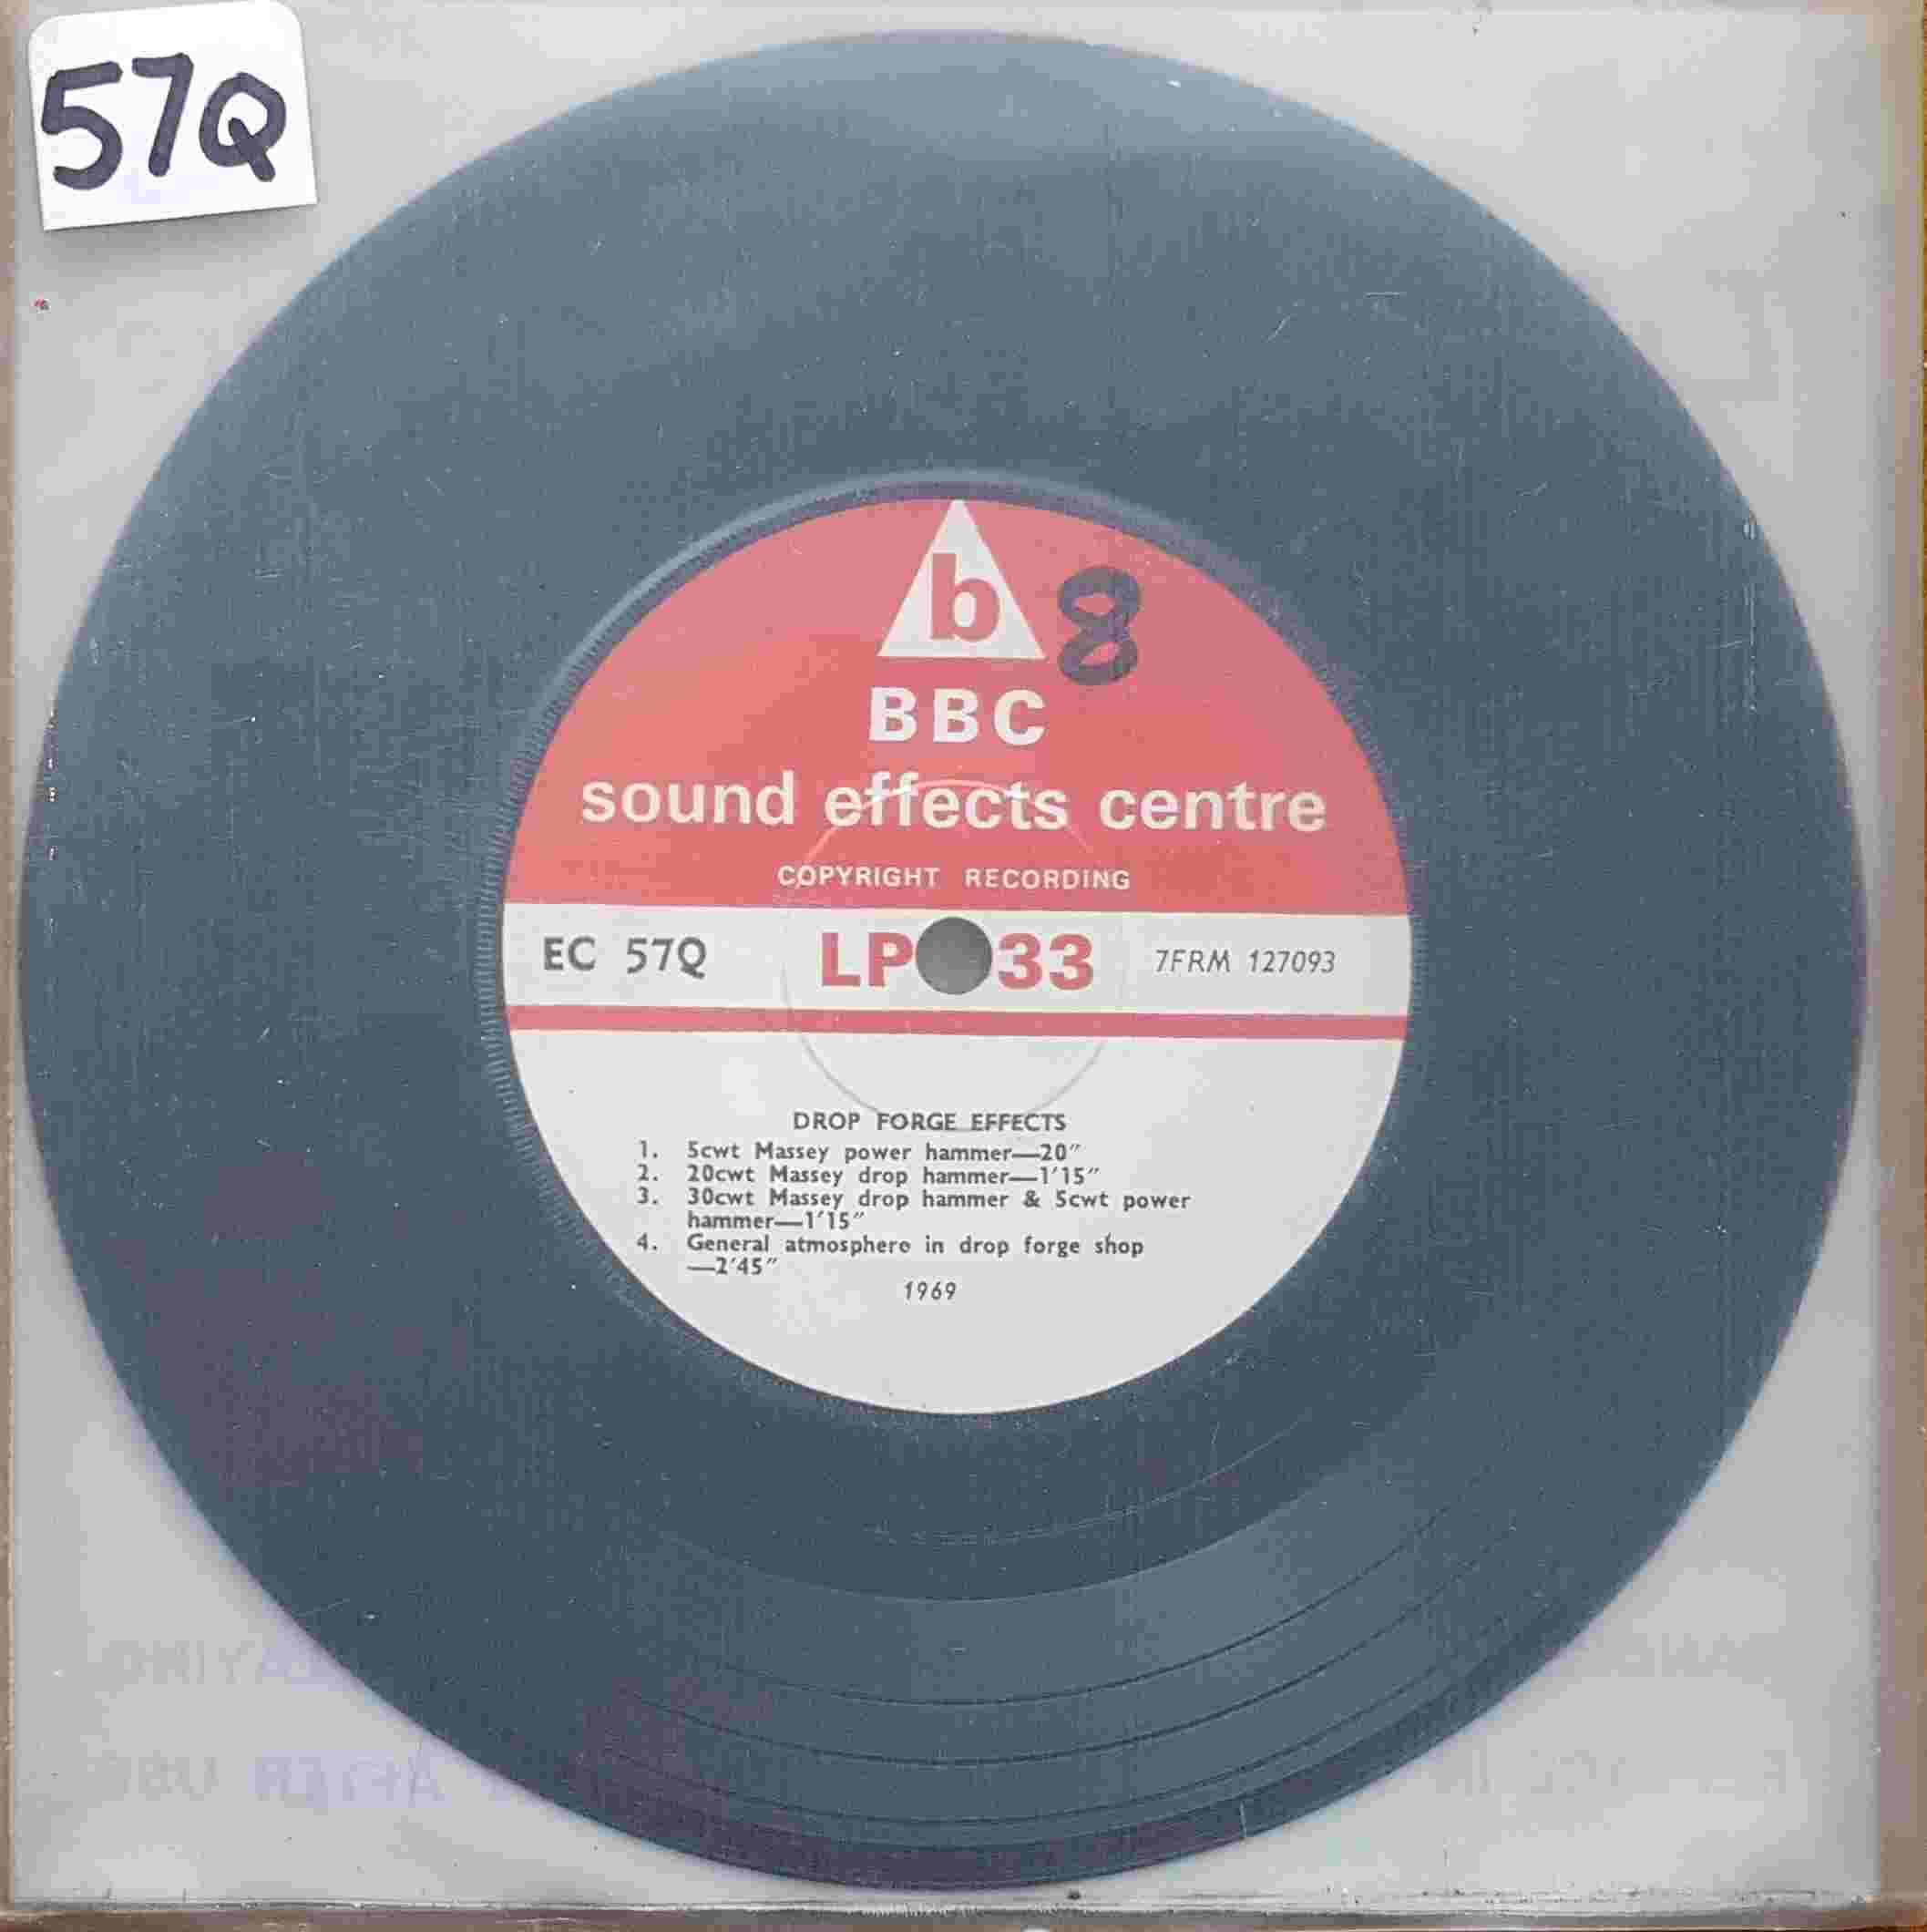 Picture of EC 57Q Drop forge effects by artist Not registered from the BBC records and Tapes library